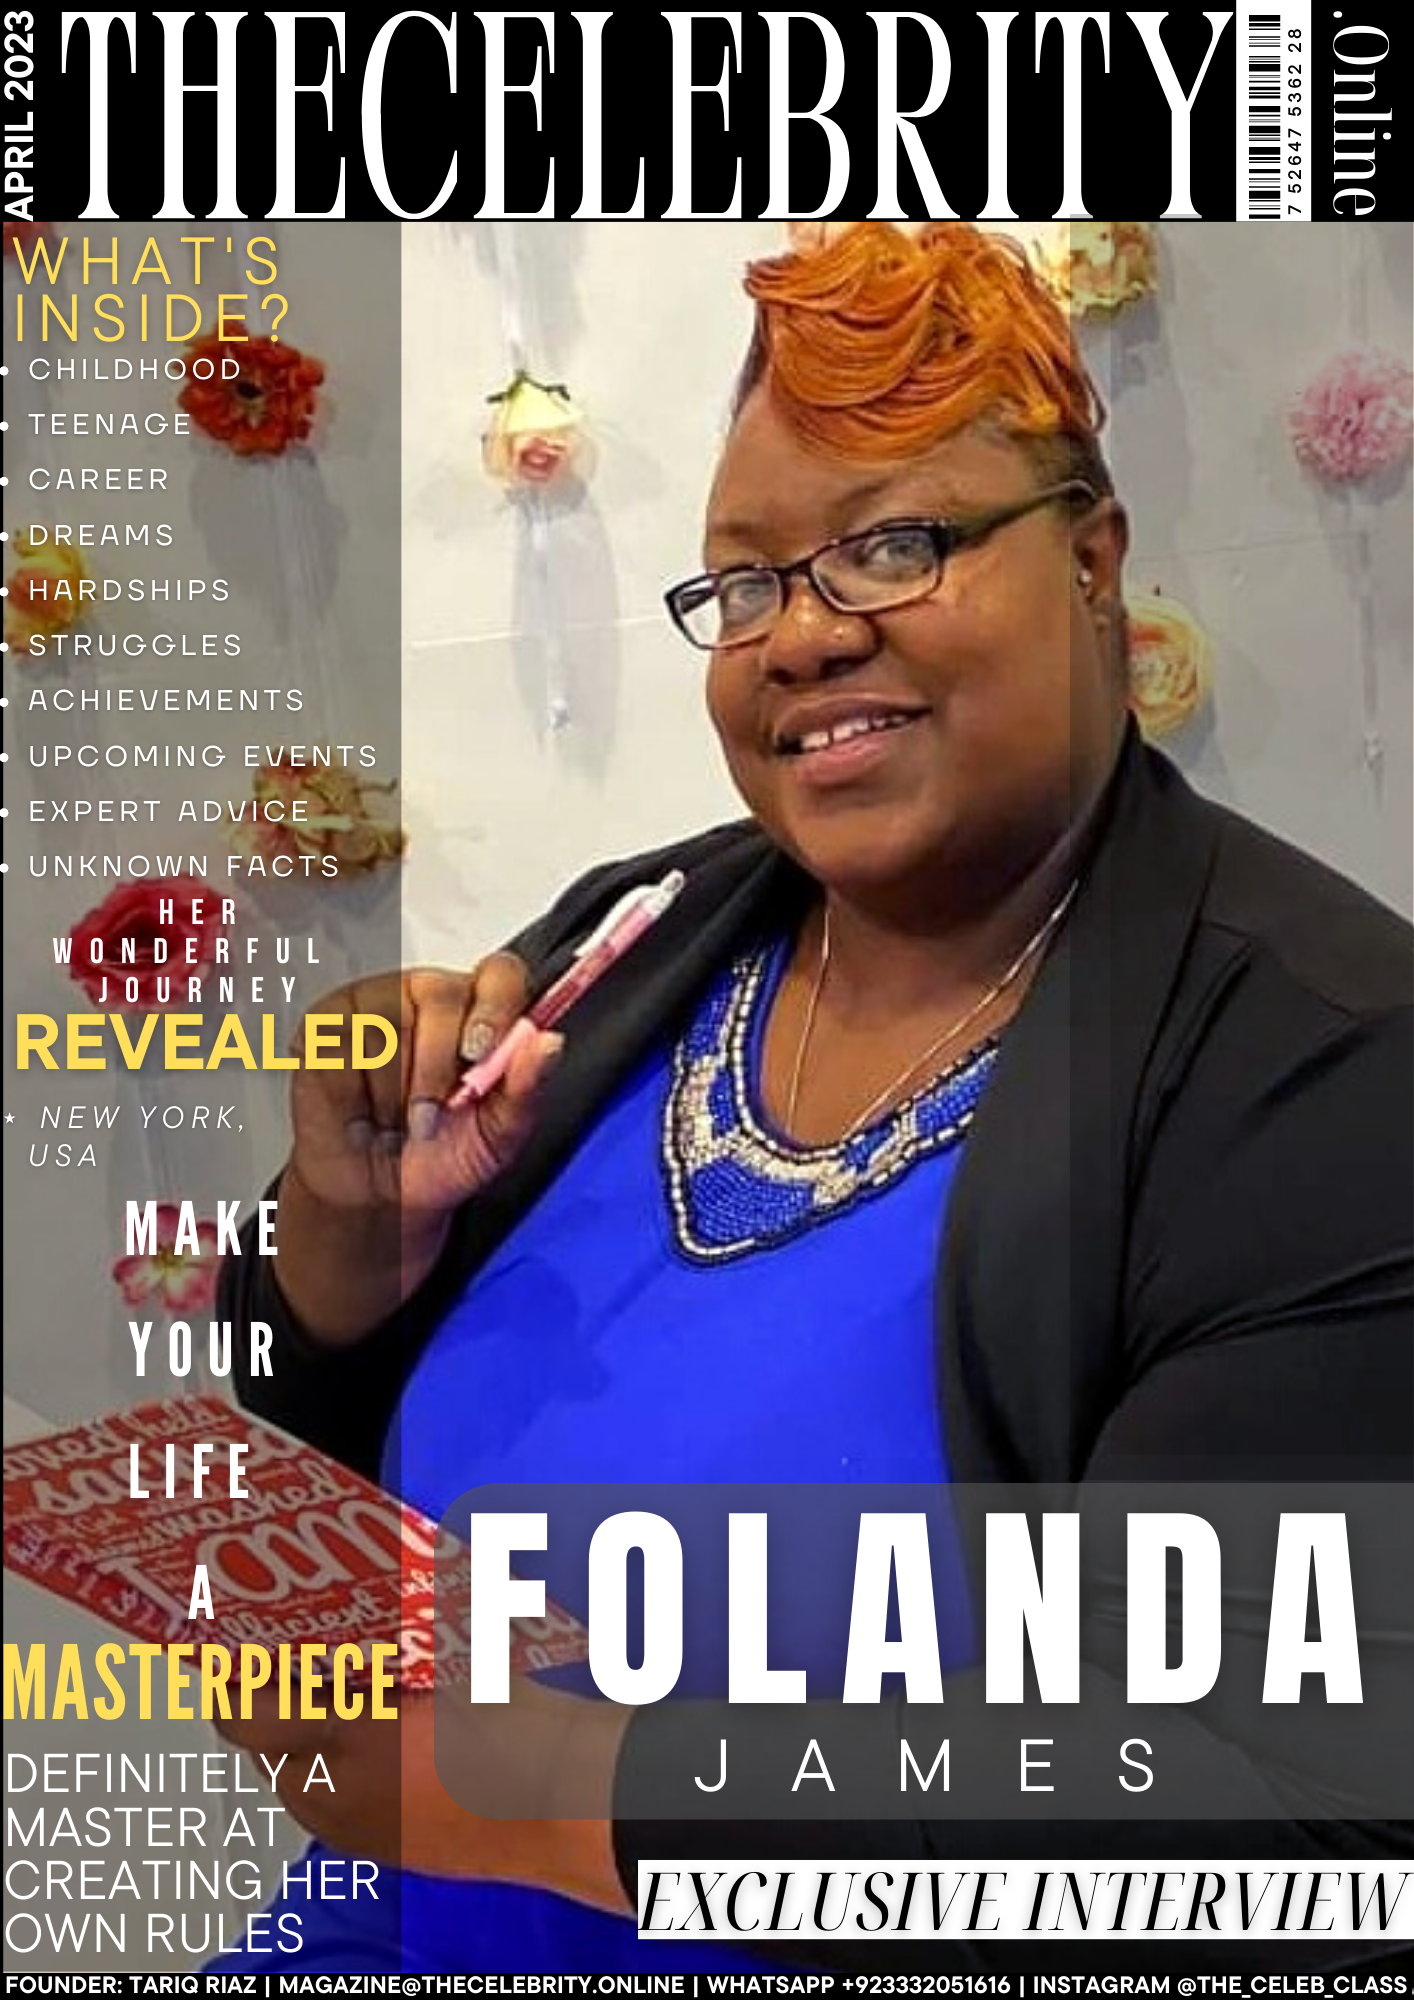 Folanda James Exclusive Interview – ‘Never give up on yourself or your dreams’